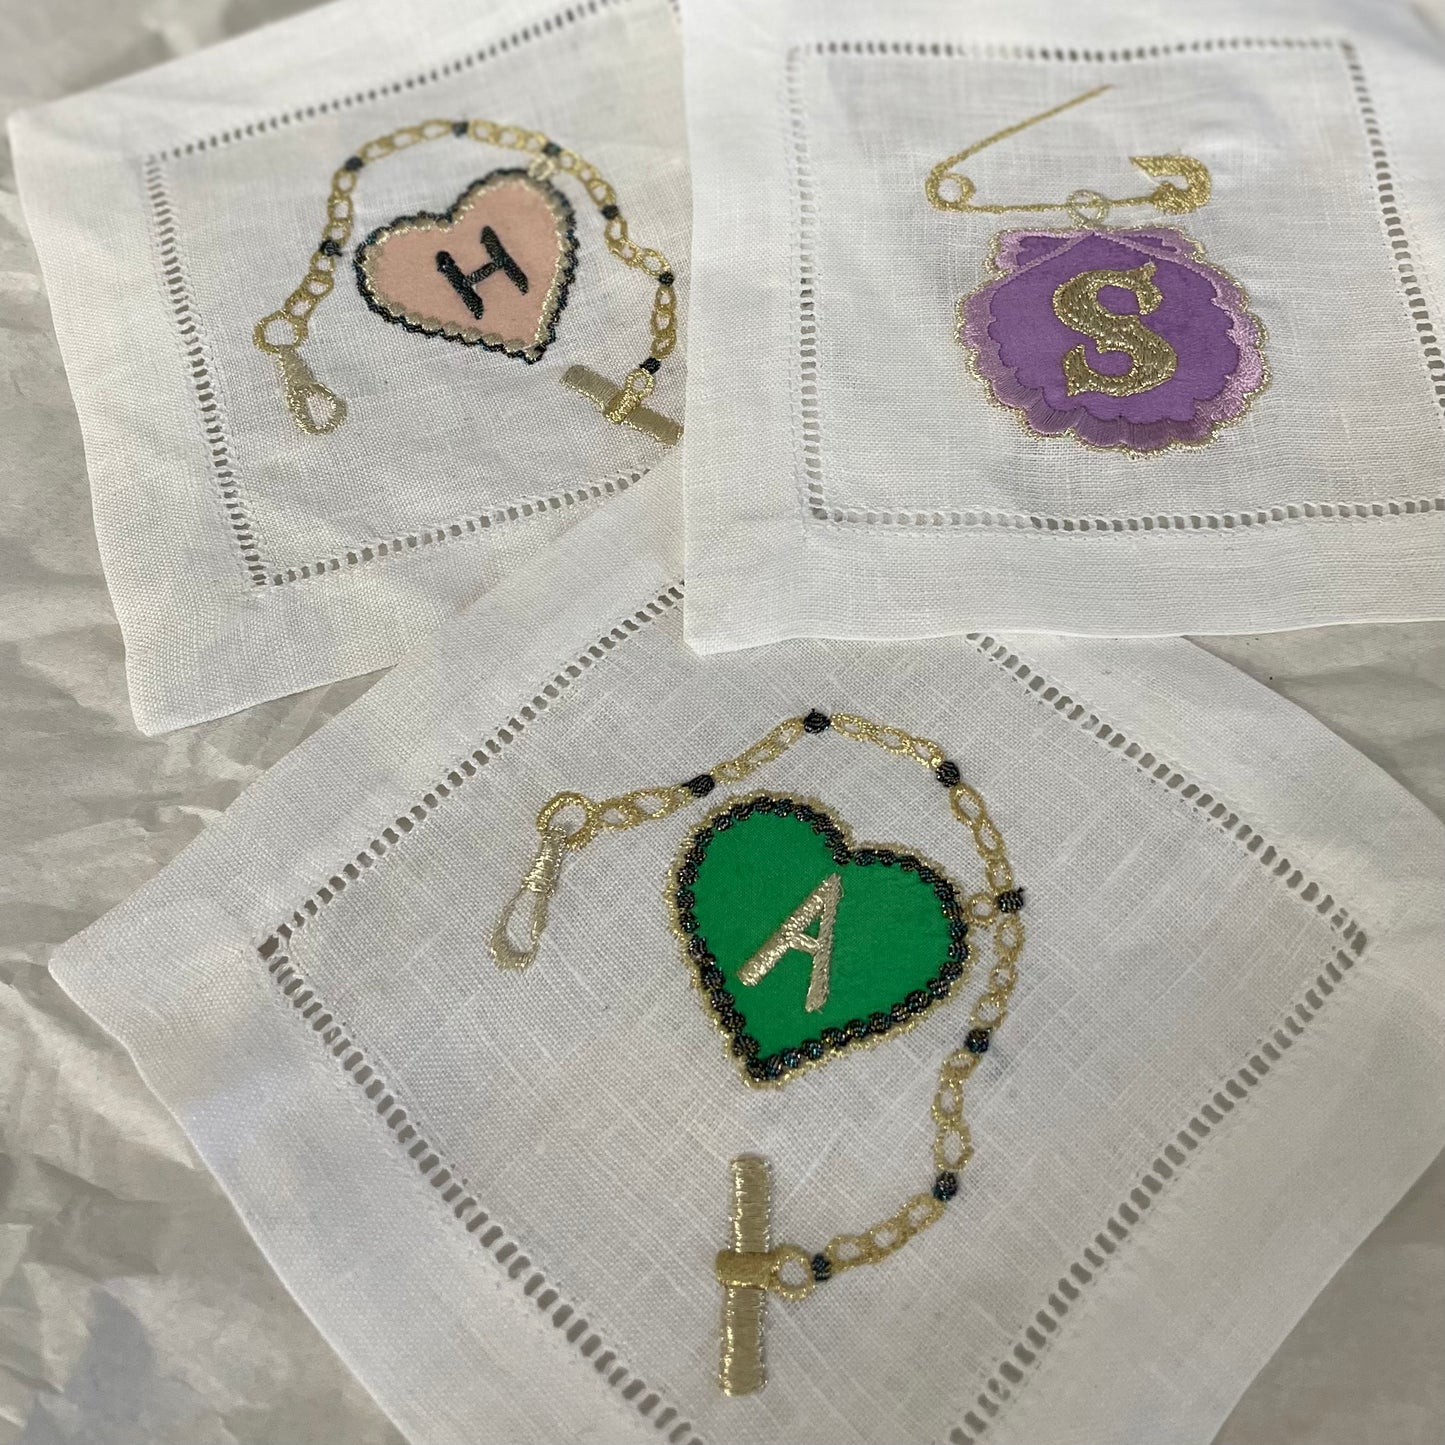 Three pieces of embroidered artworks from the Love Token collection on a white background